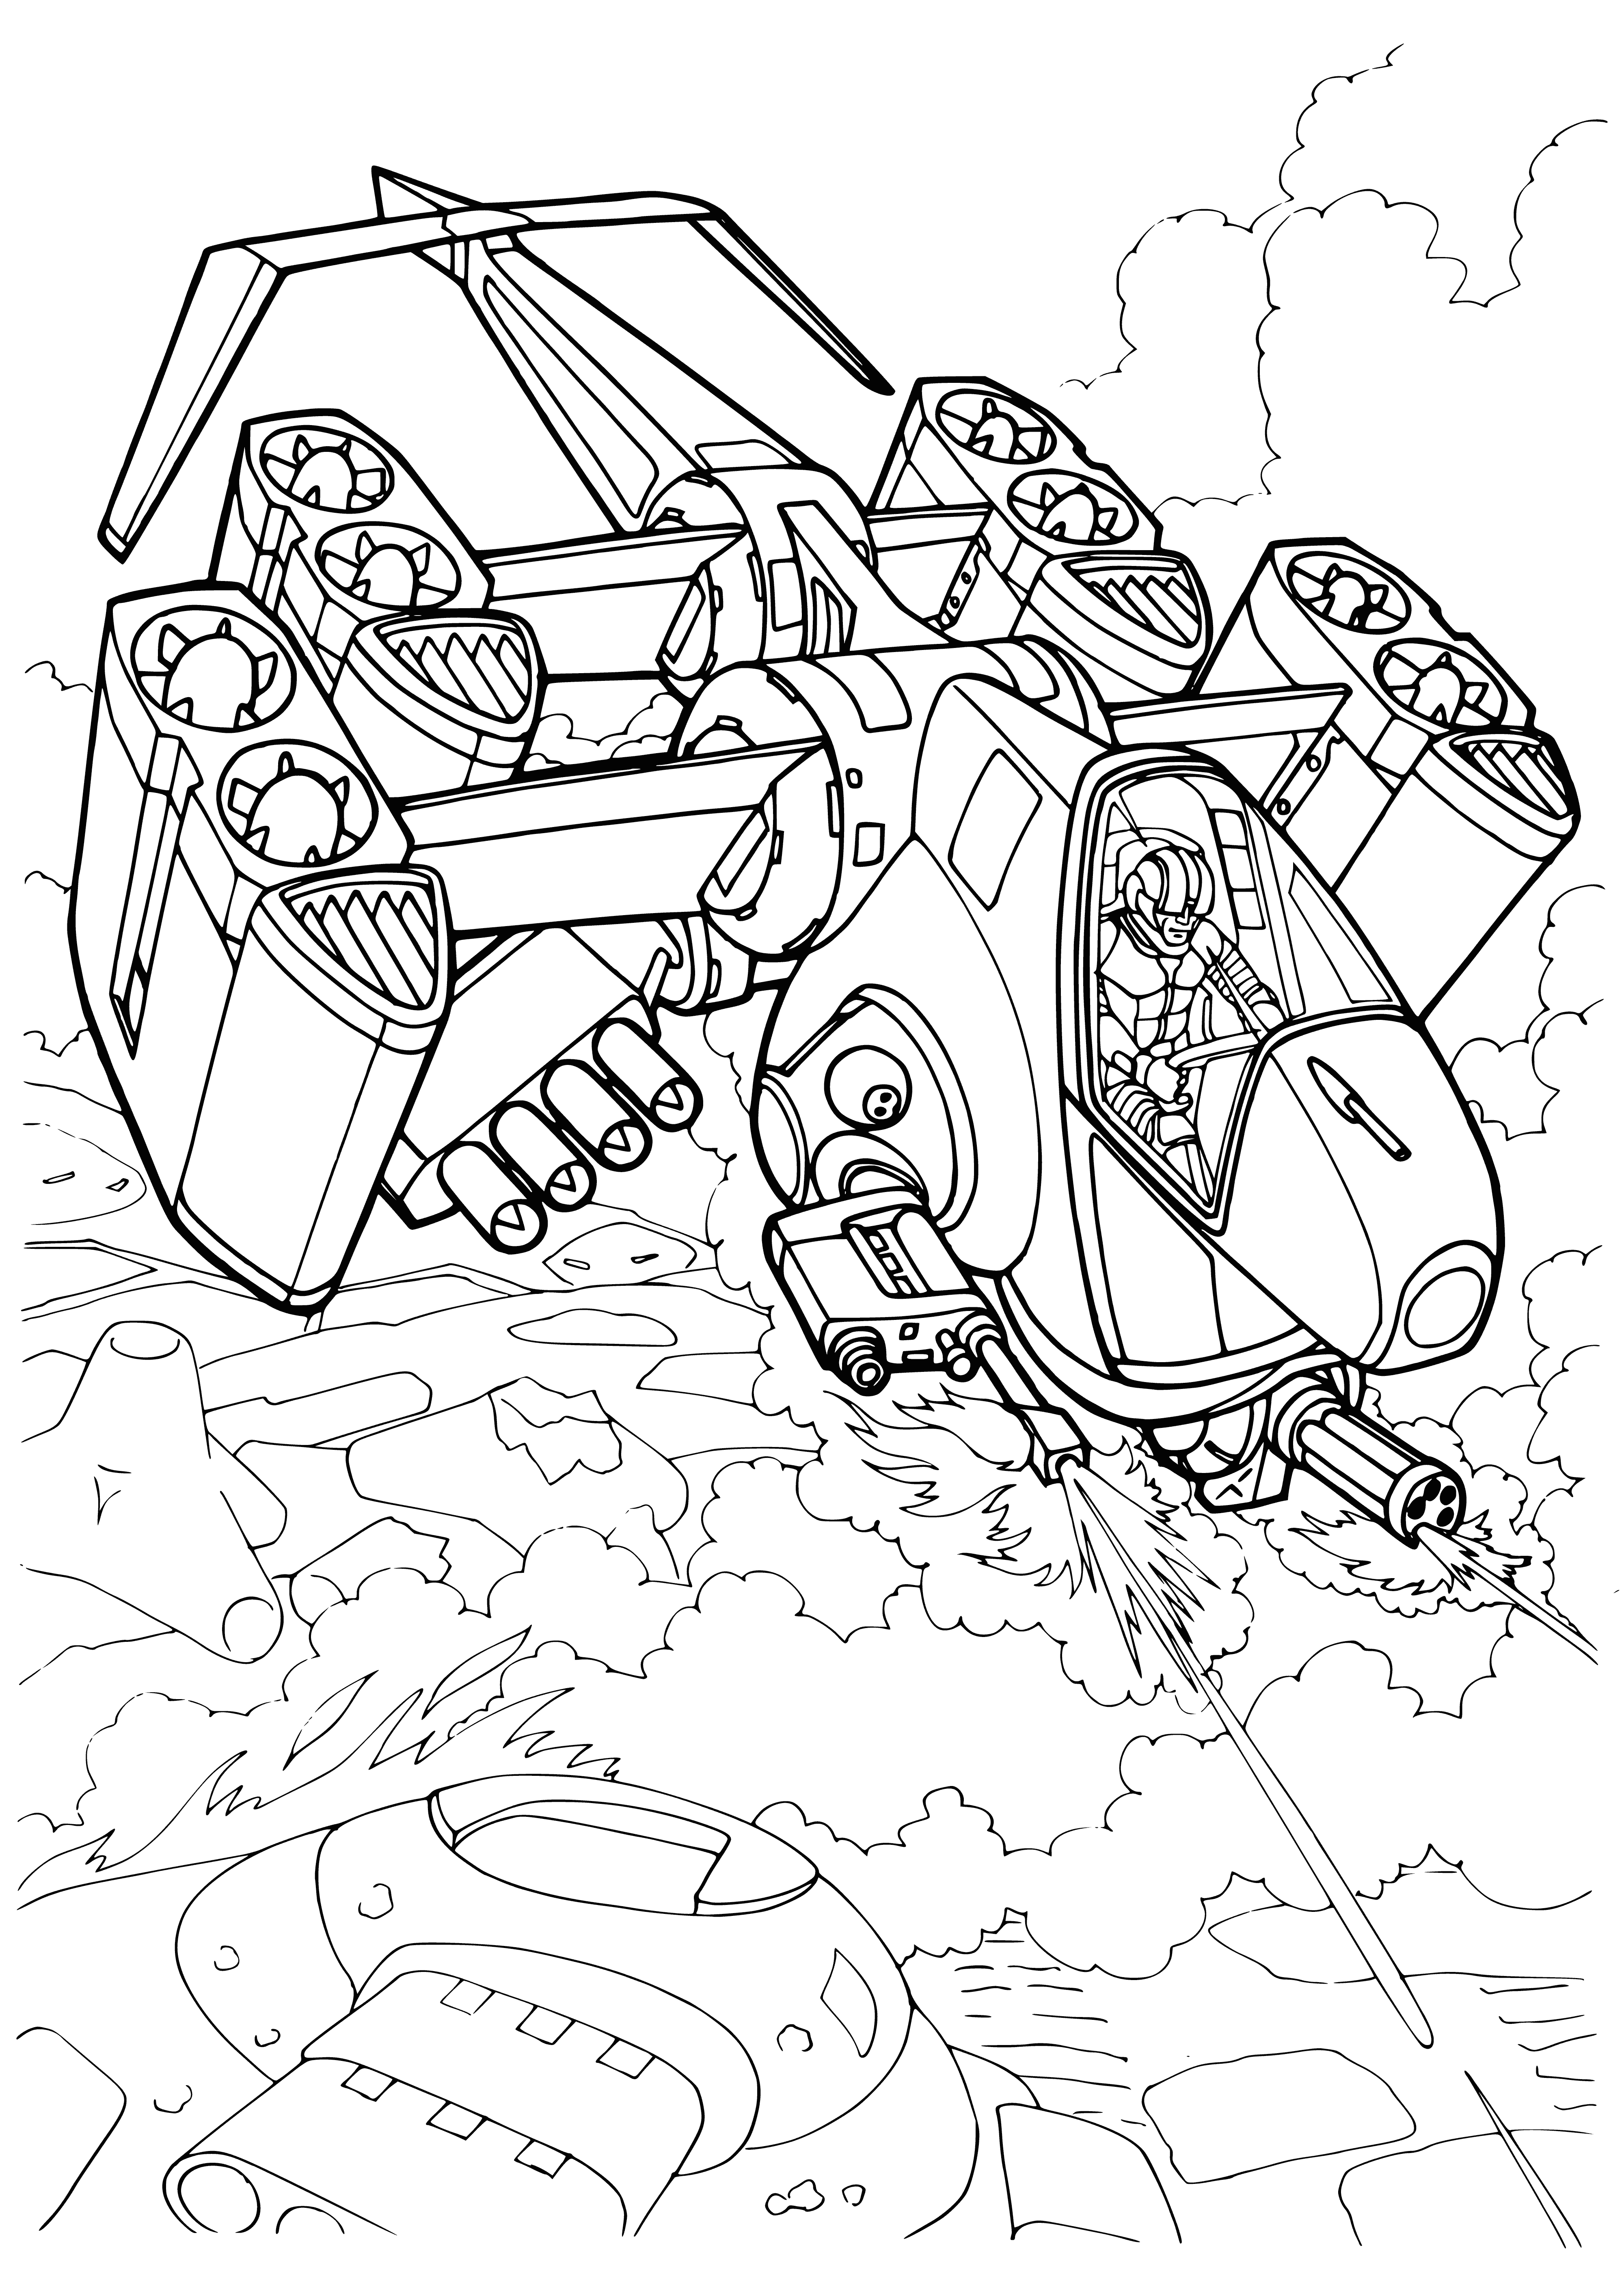 coloring page: Future of war: Attack rotorcraft with heavy weapons to take out large targets & inflict maximum damage.